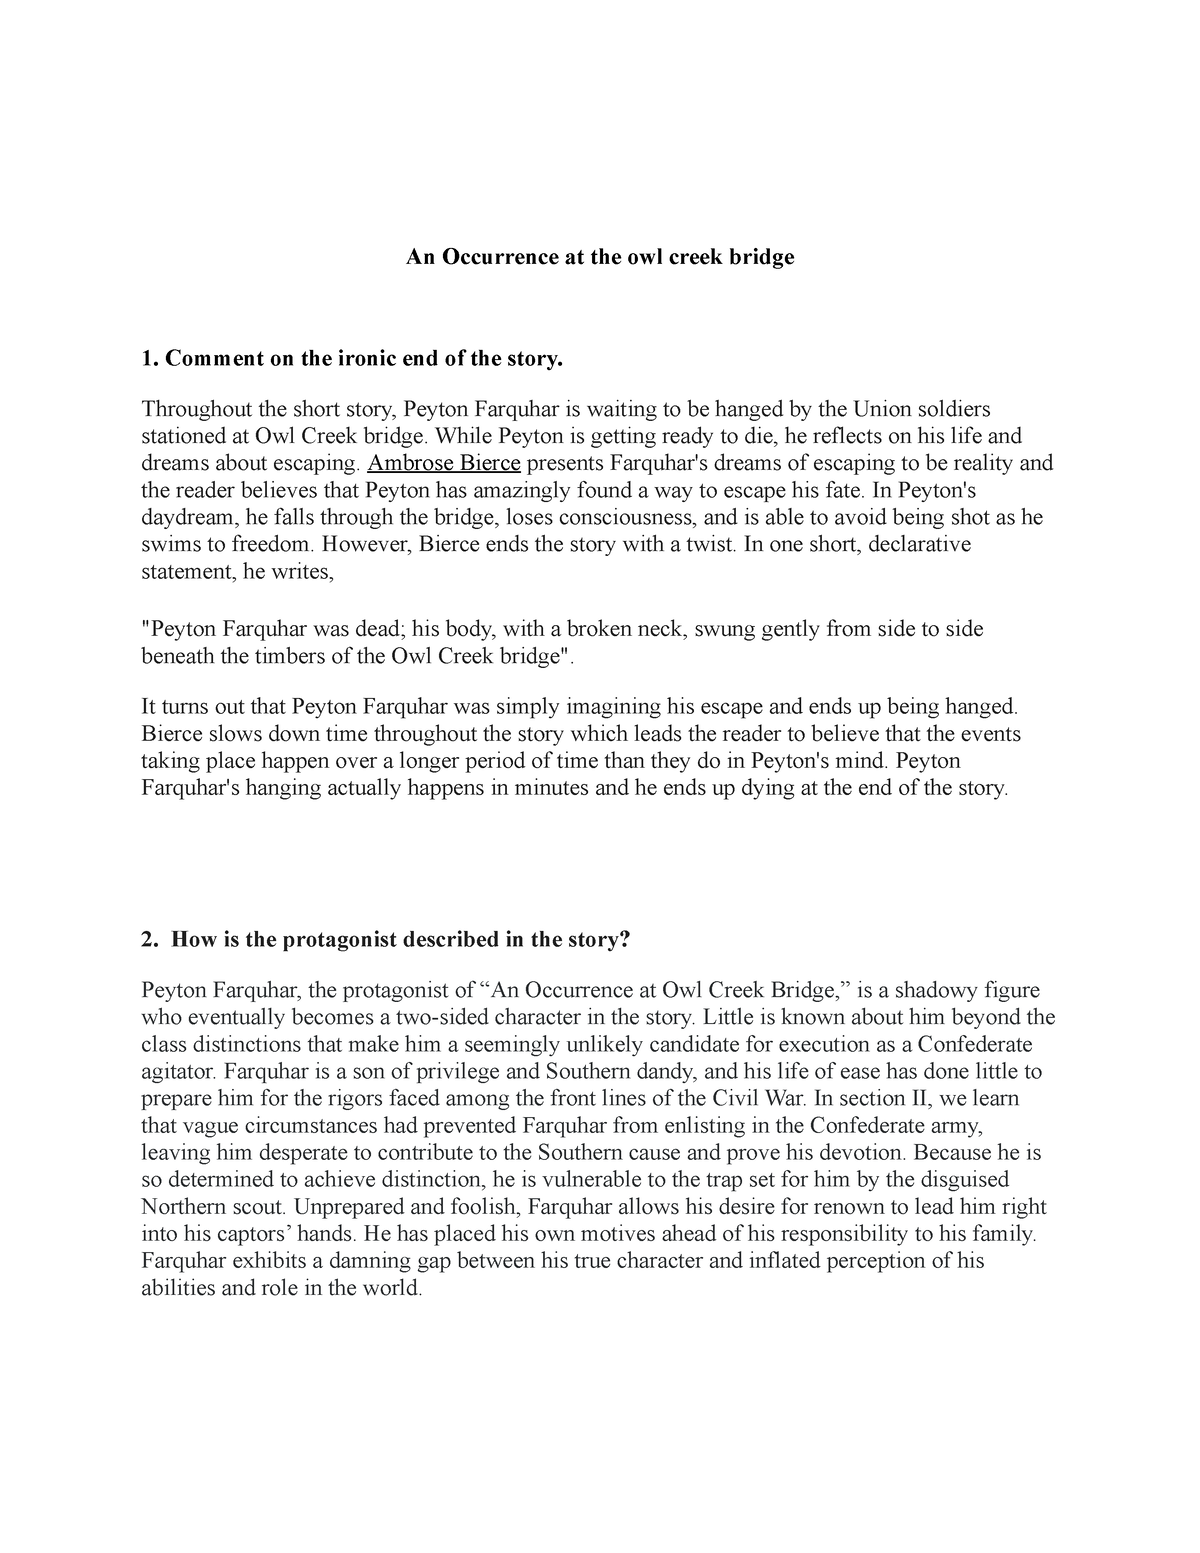 literary analysis essay on an occurrence at owl creek bridge